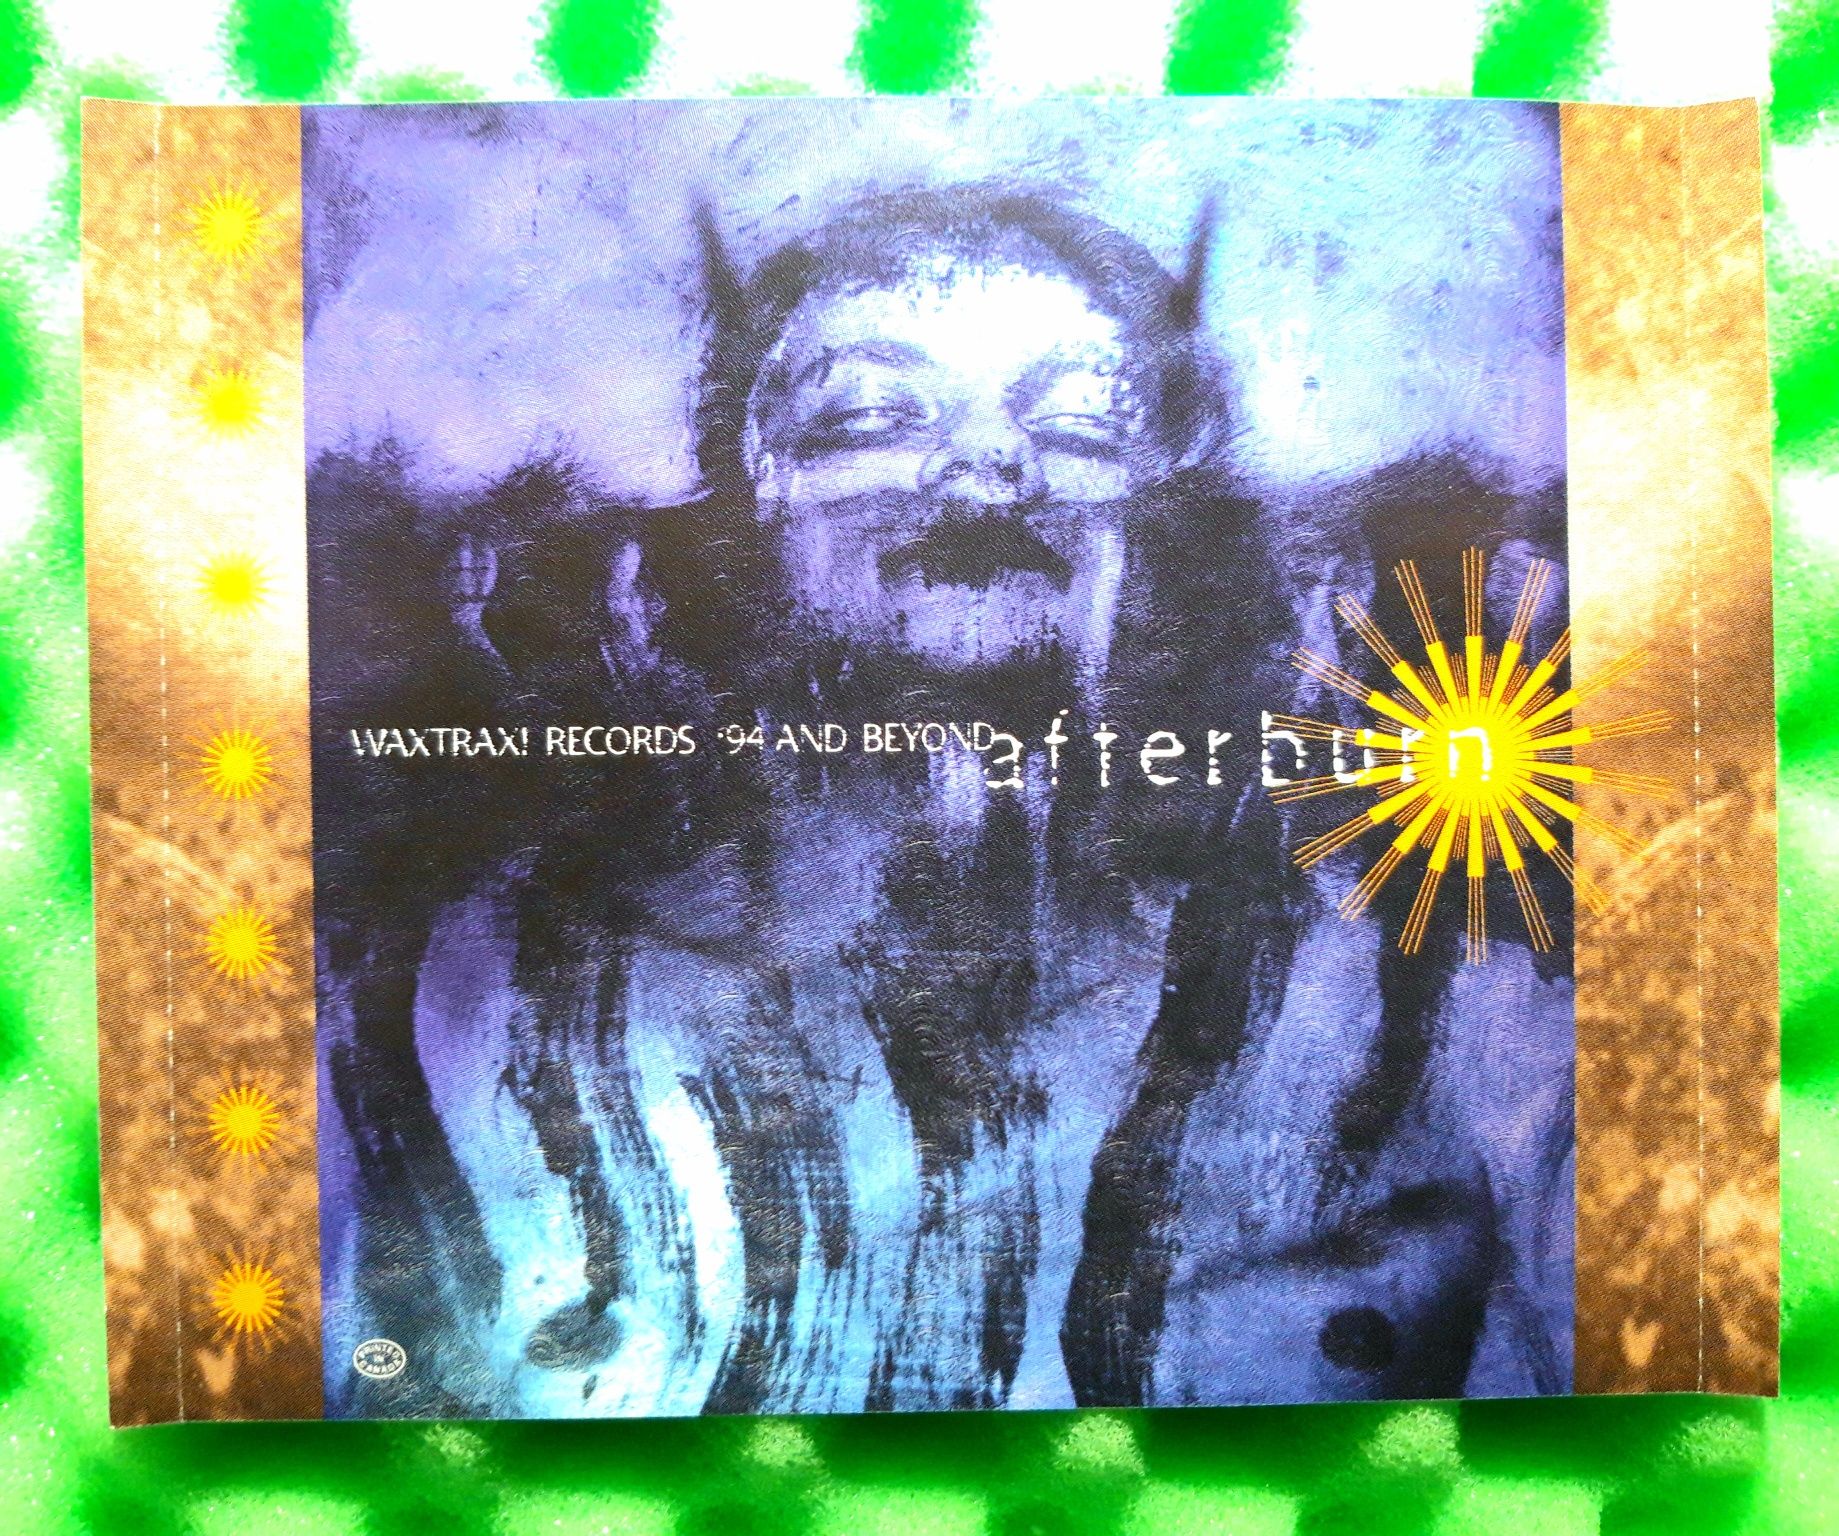 Afterburn (WaxTrax! Records '94 And Beyond) CD, 1994